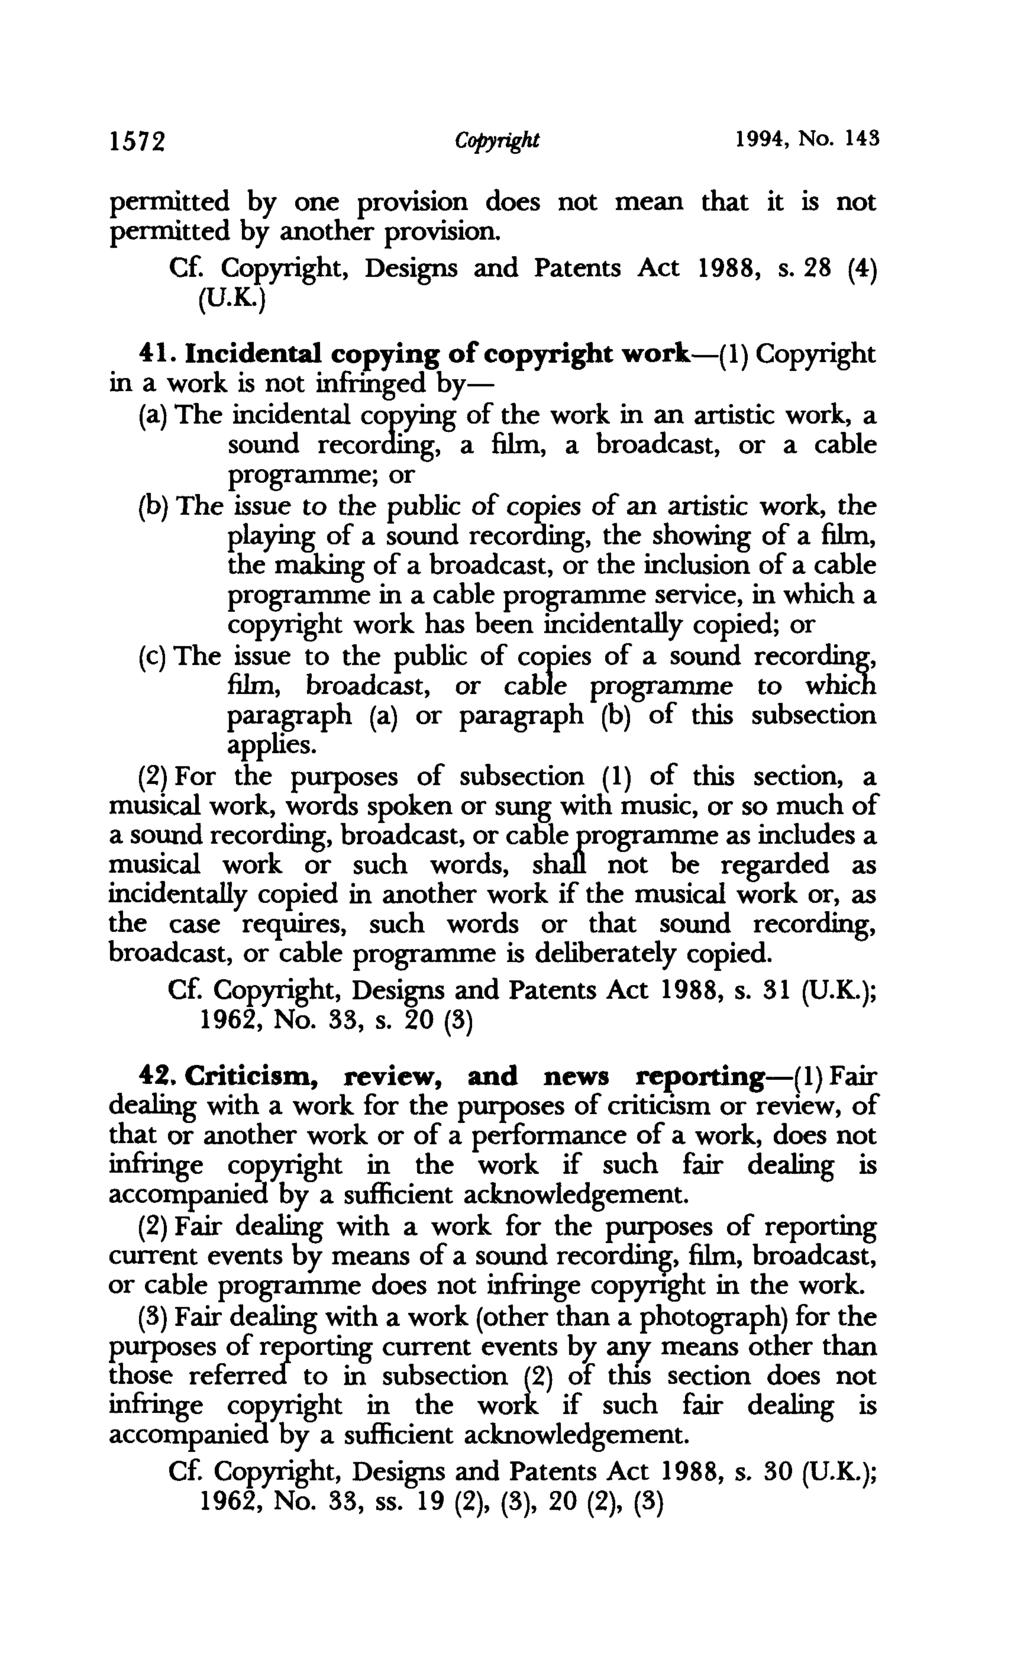 1572 COPYright 1994, No. 143 pemritted by one provision does not mean that it is not pennitted by another provision. C Copyright, Designs and Patents Act 1988, s.28 (4) (U.K.) 41.